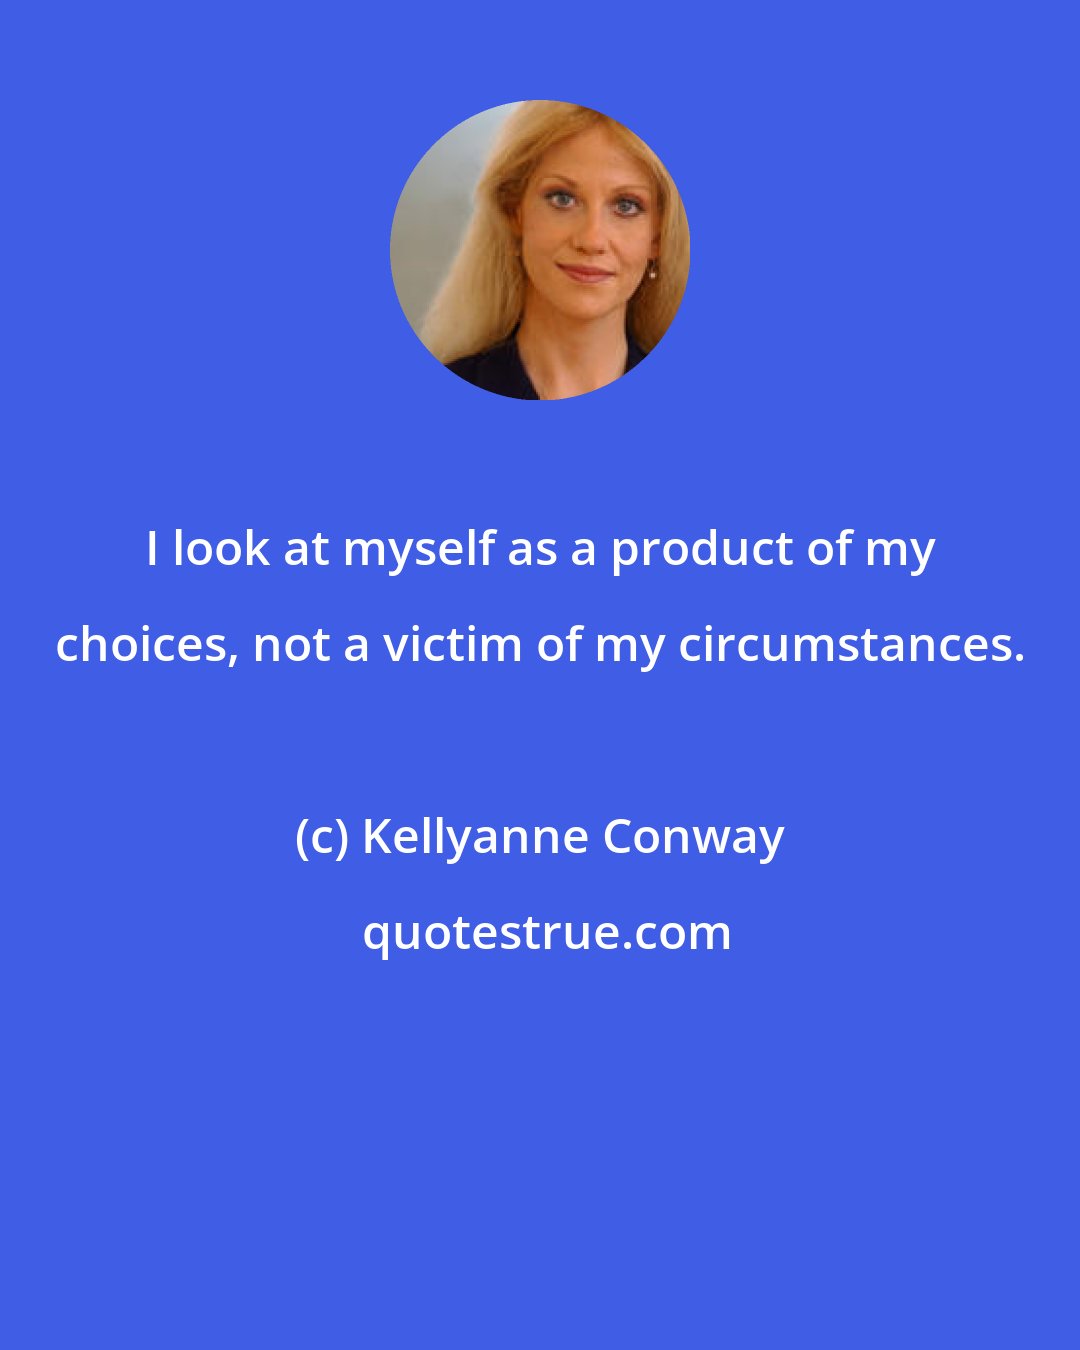 Kellyanne Conway: I look at myself as a product of my choices, not a victim of my circumstances.